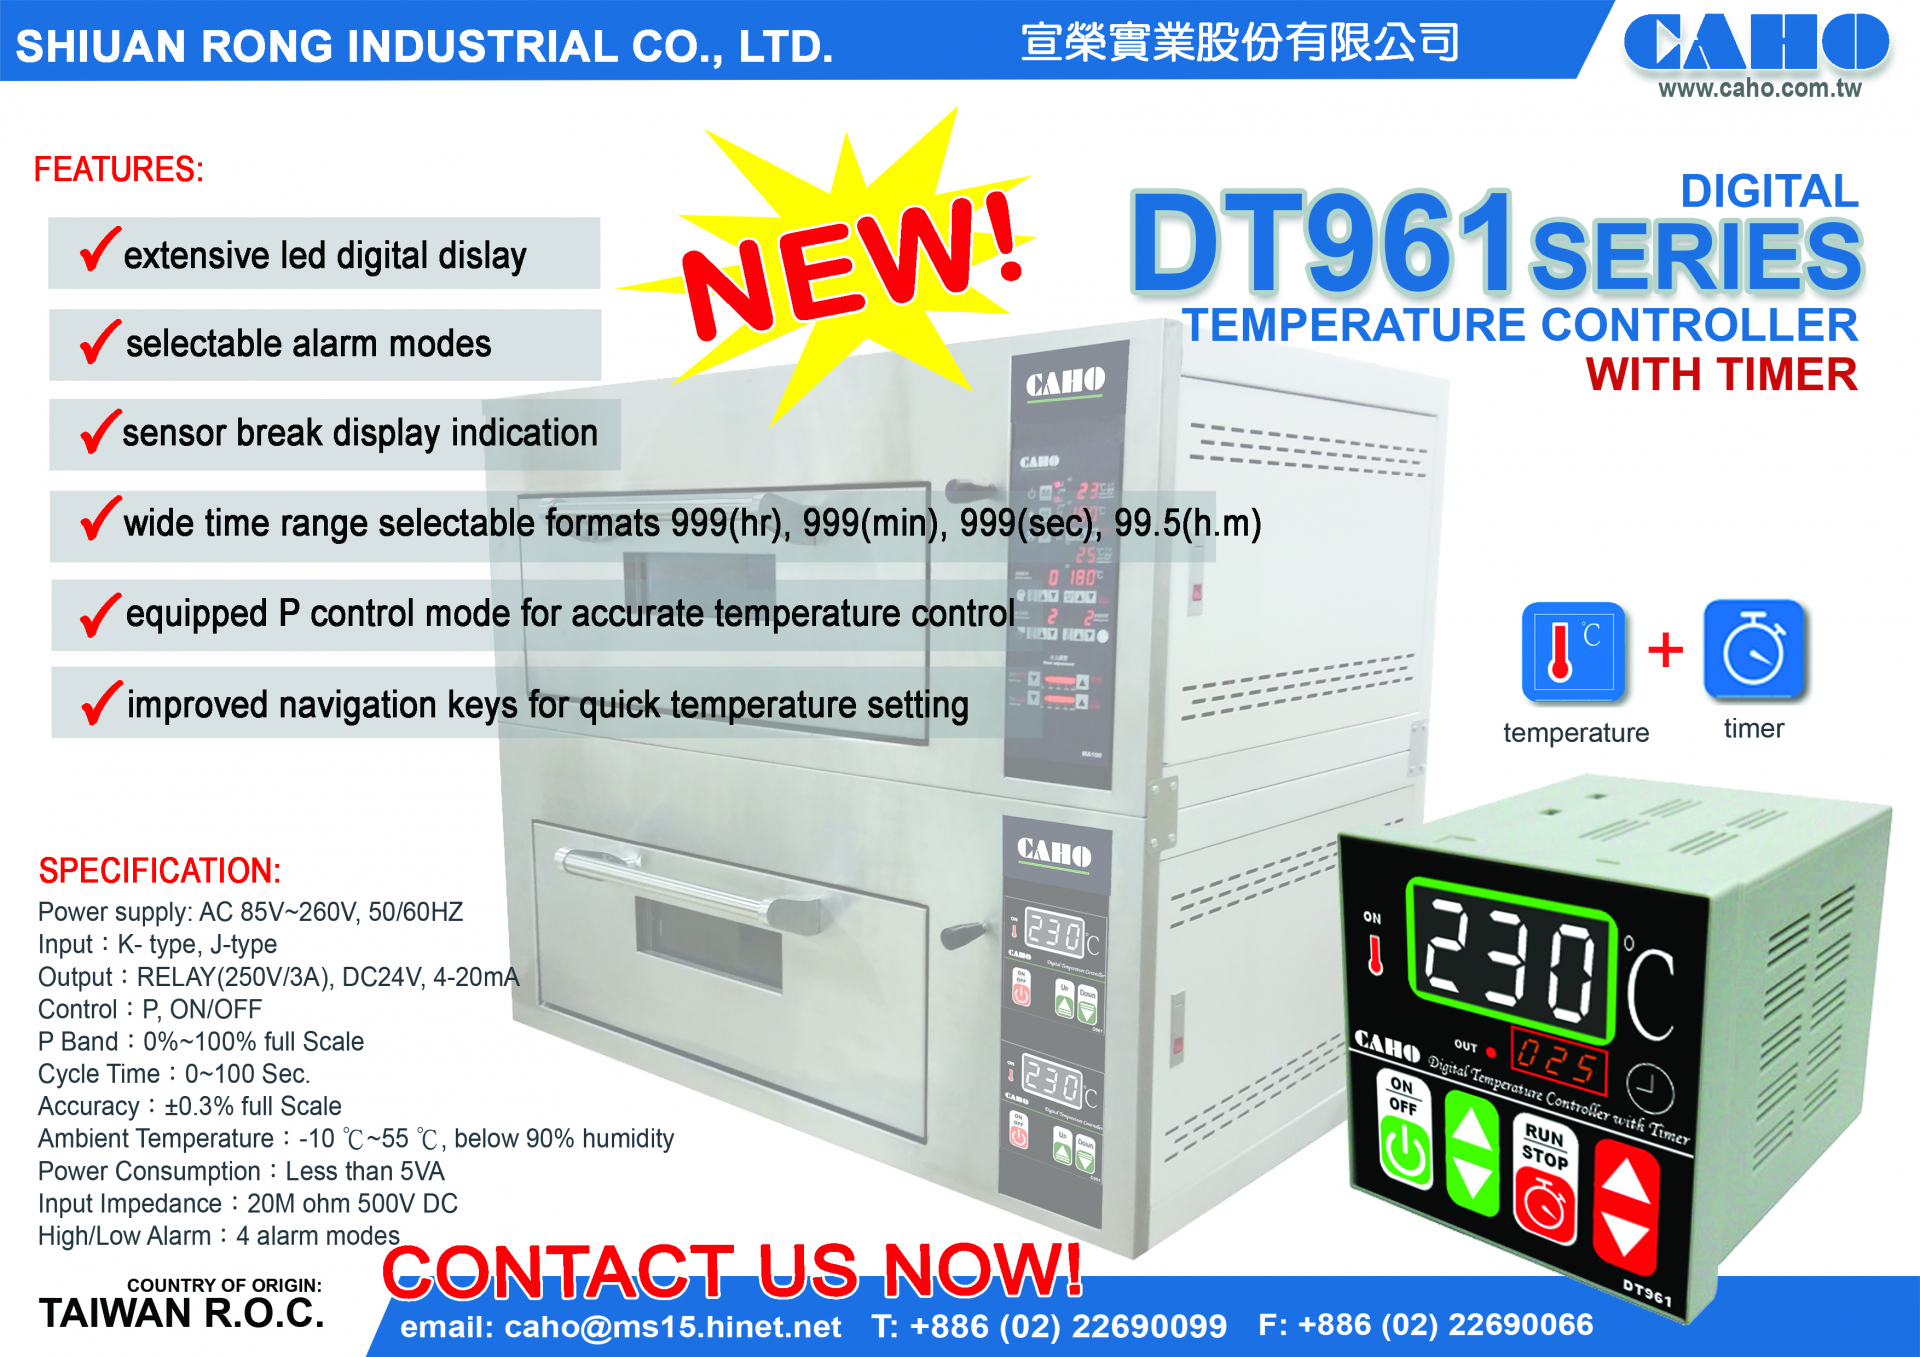 DT961 - with timer (ads)